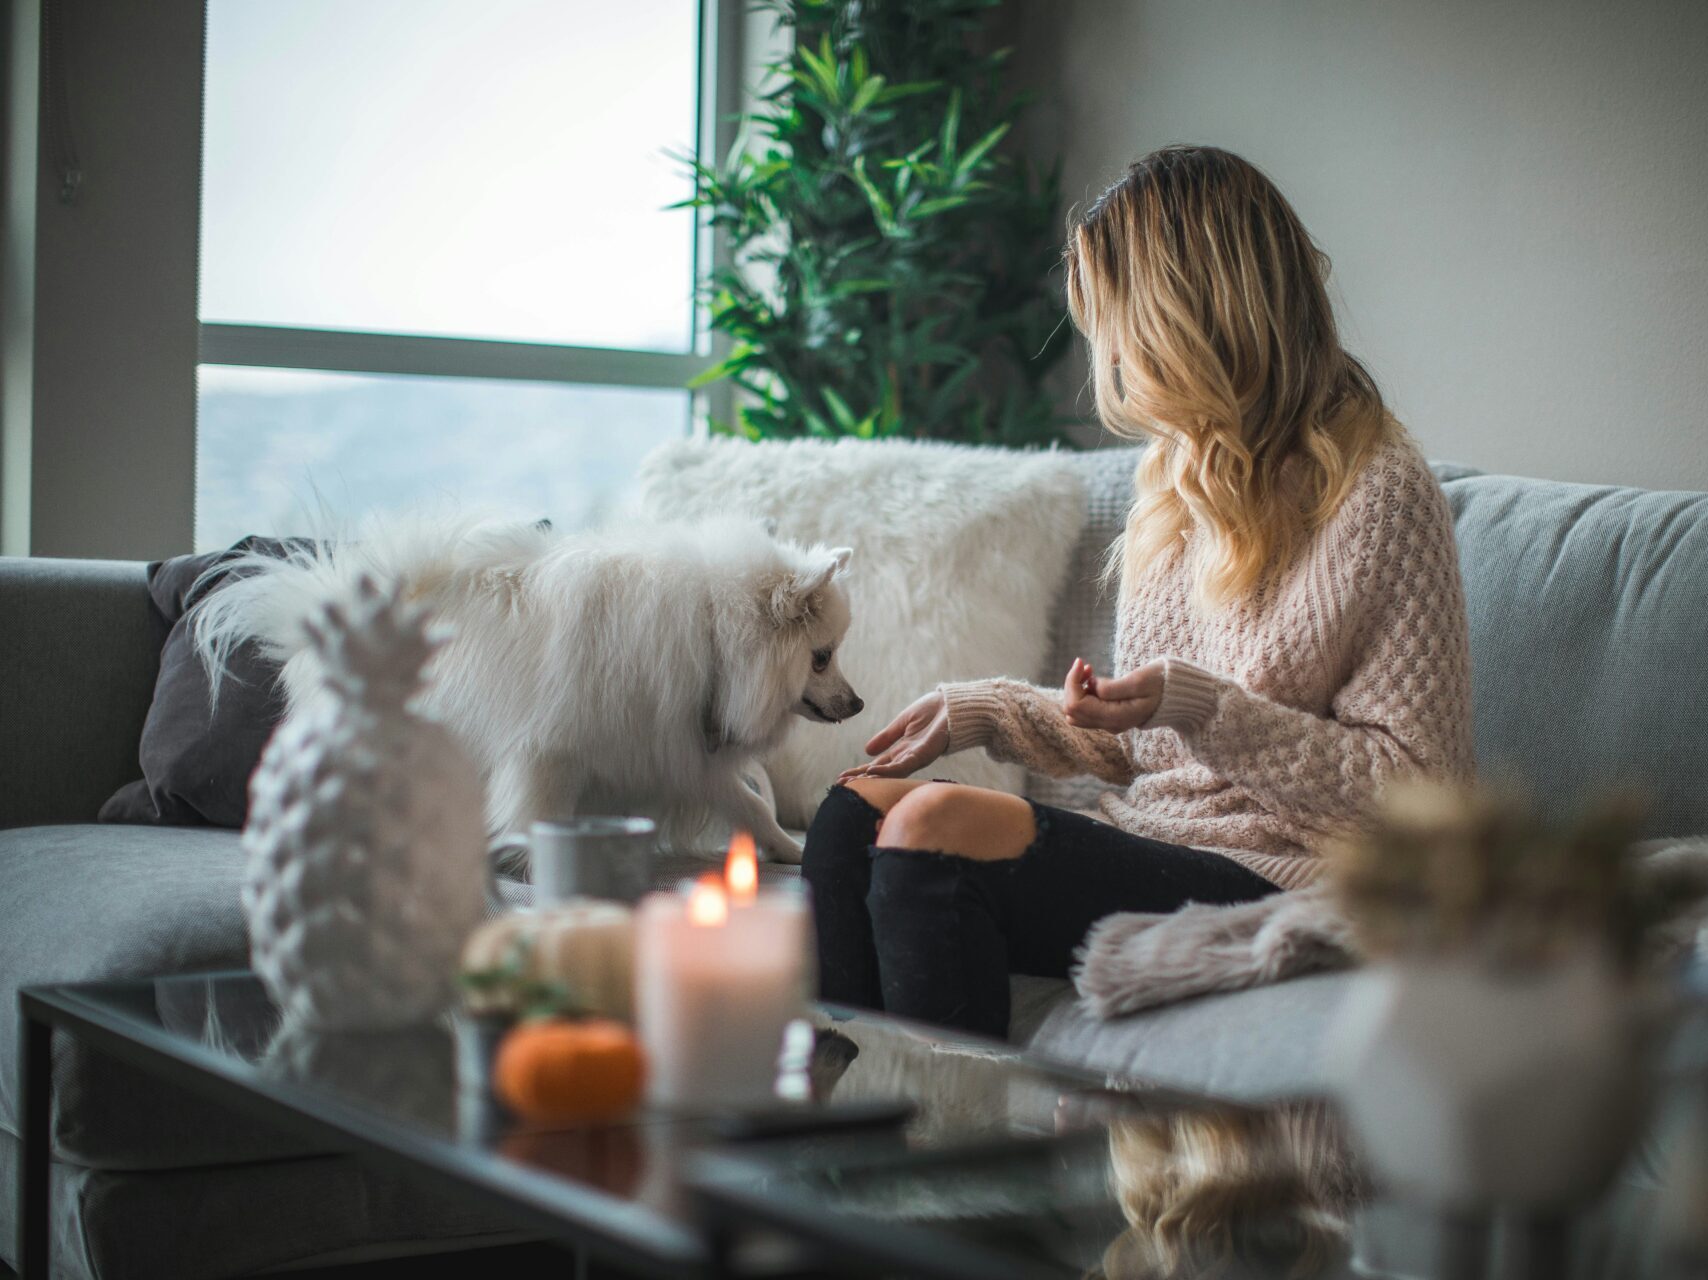 Woman sitting on couch with candles lit, looking at a white fluffy dog